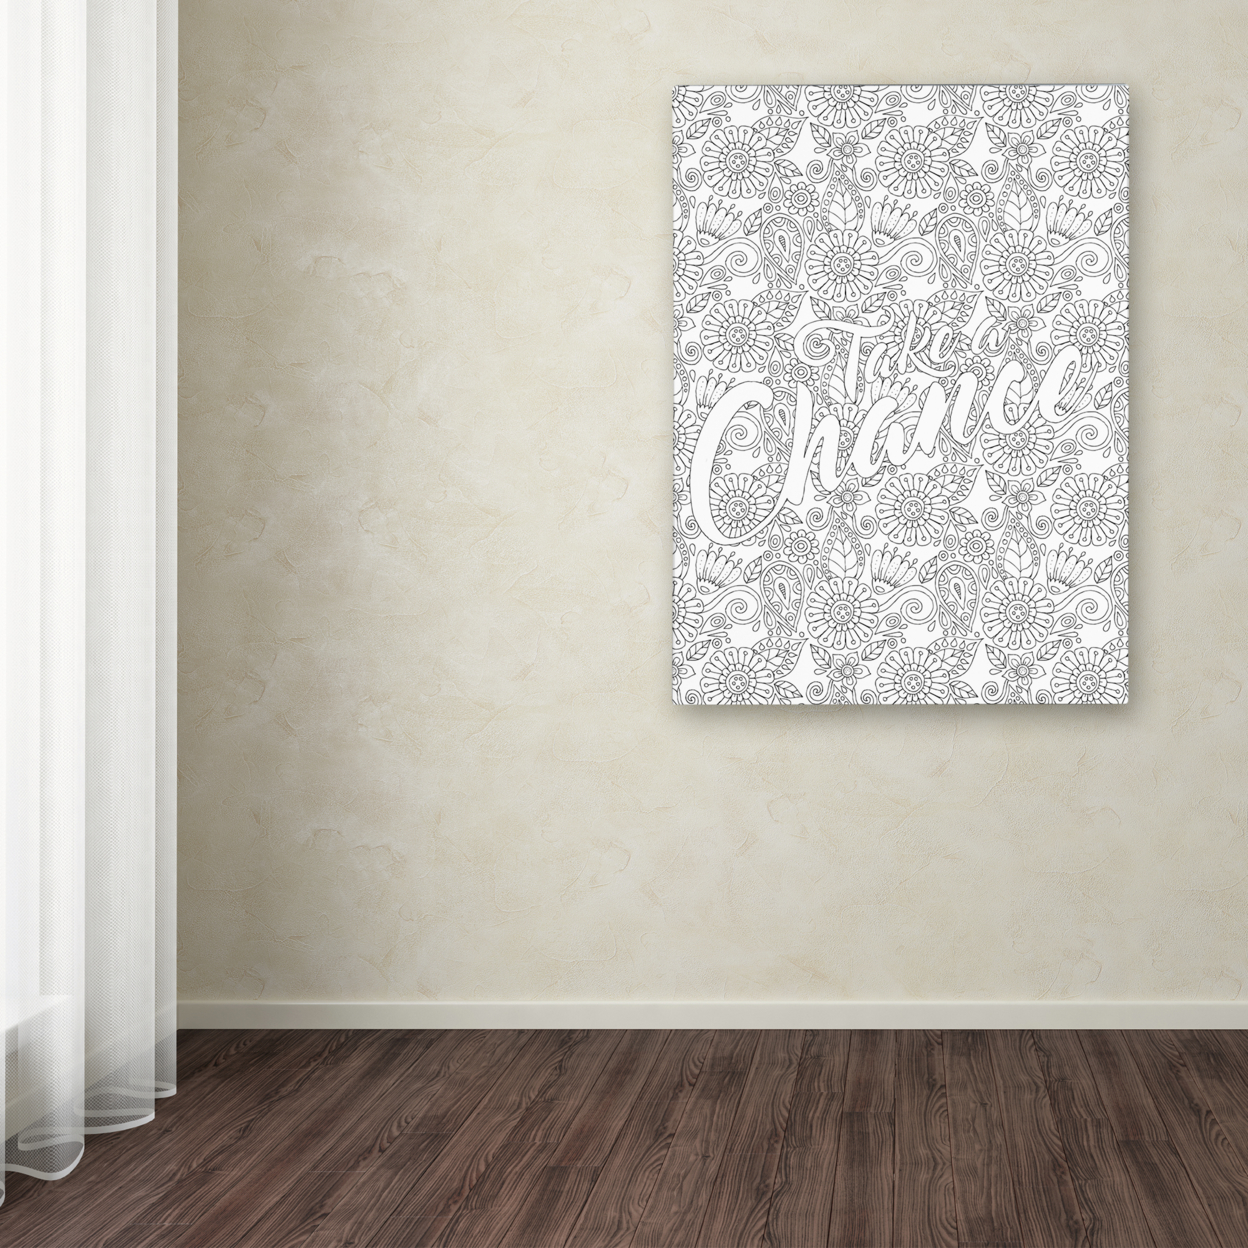 Hello Angel 'Inspirational Quotes 12' Canvas Wall Art 35 X 47 Inches